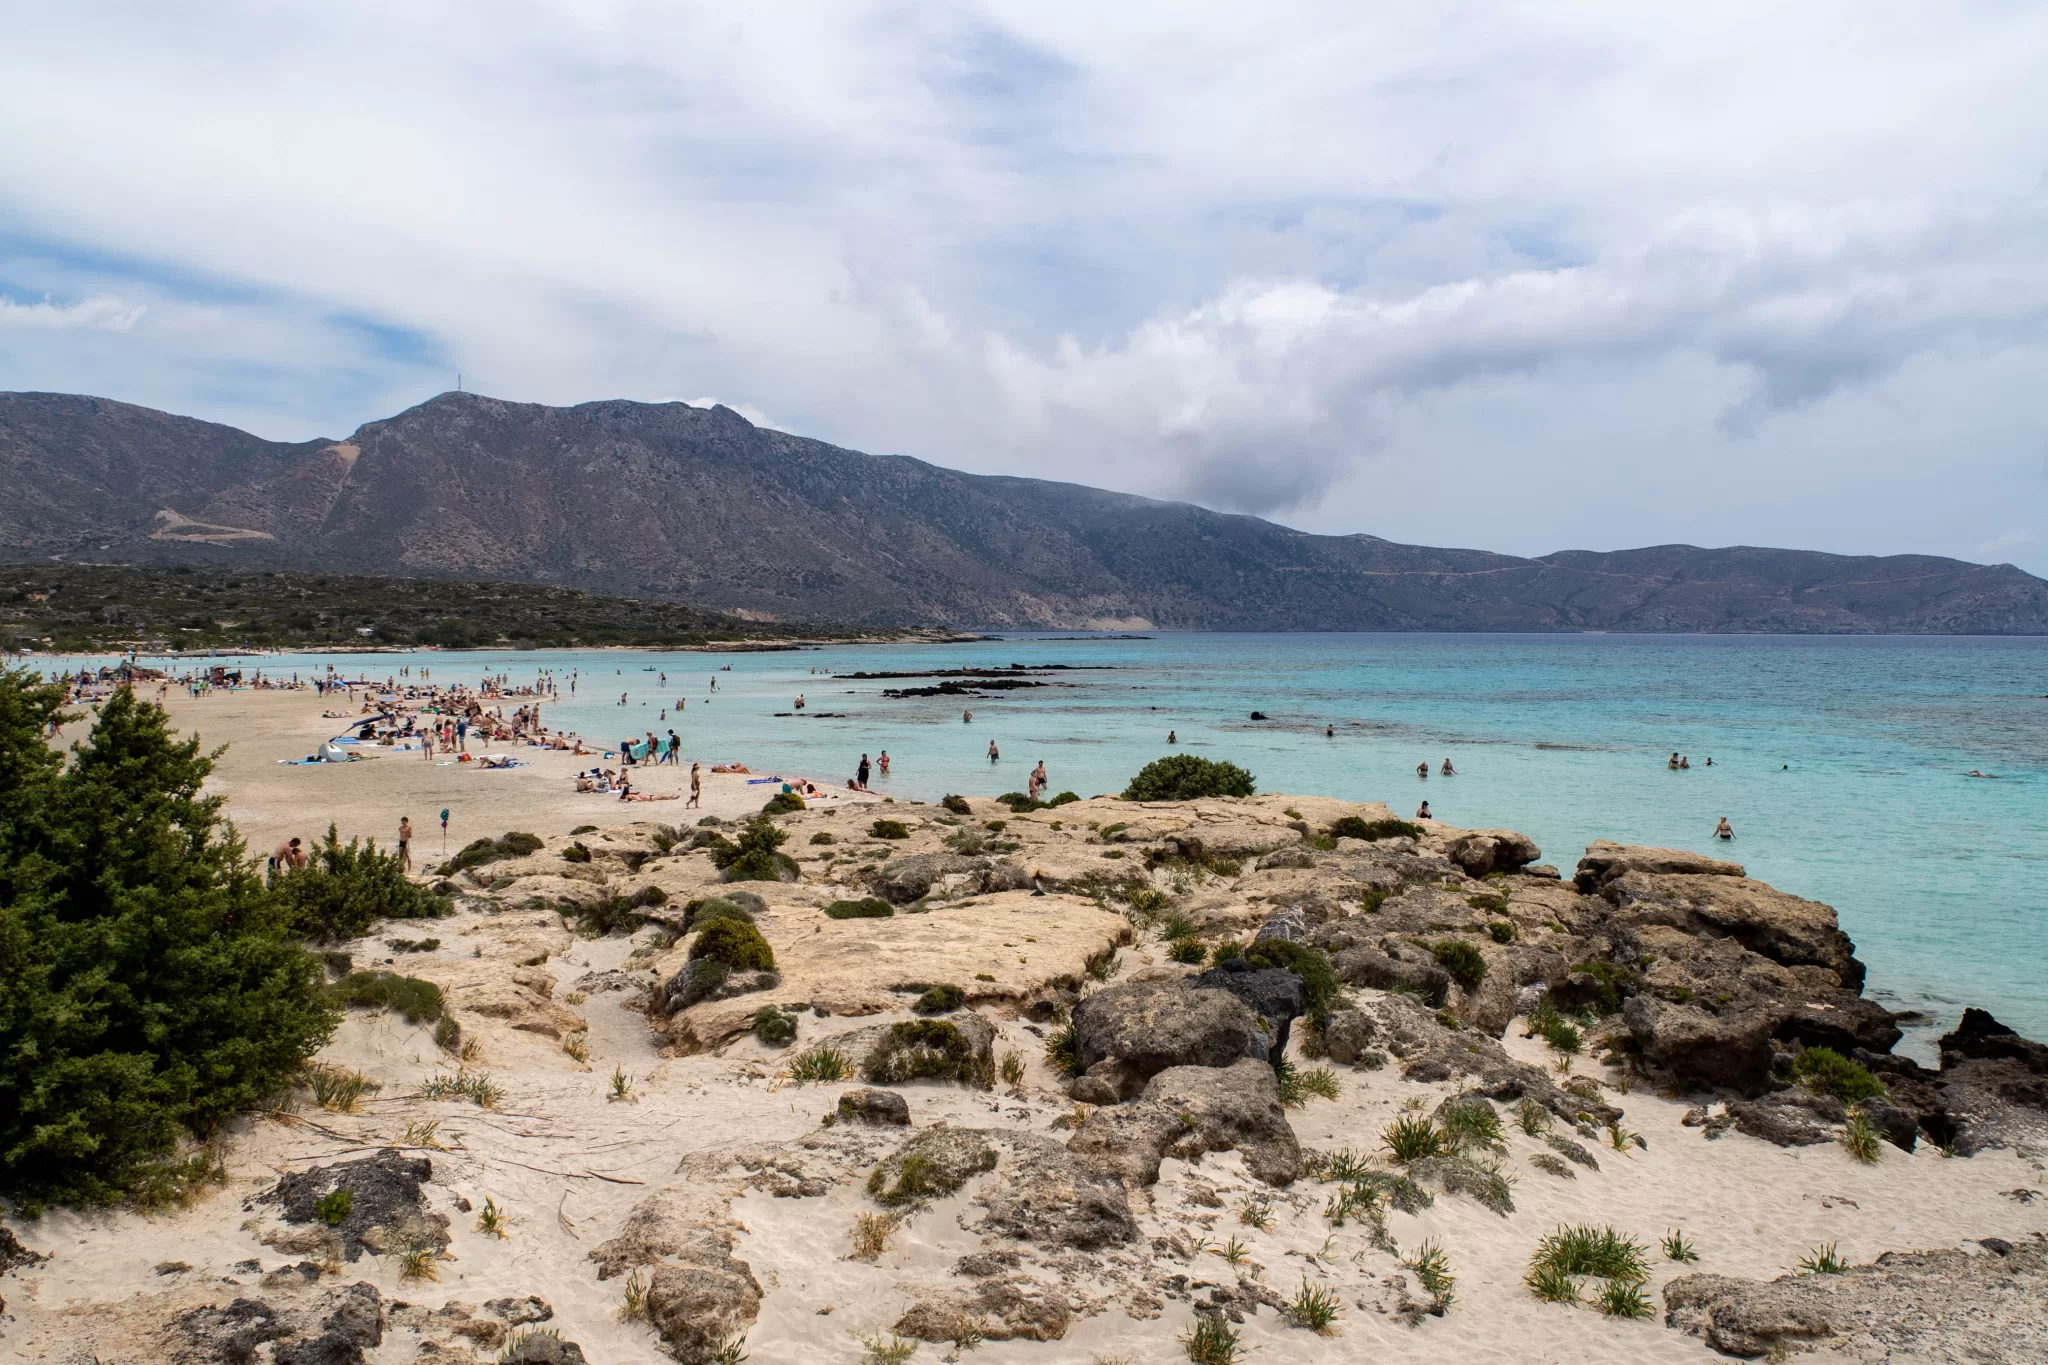 Elafonisi Beach in Crete is one of the best beaches to visit on the island. It boasts soft white sand and spectacular pink sand as well as crystal clear Mediterranean water that would rival the most beautiful Caribbean beach.